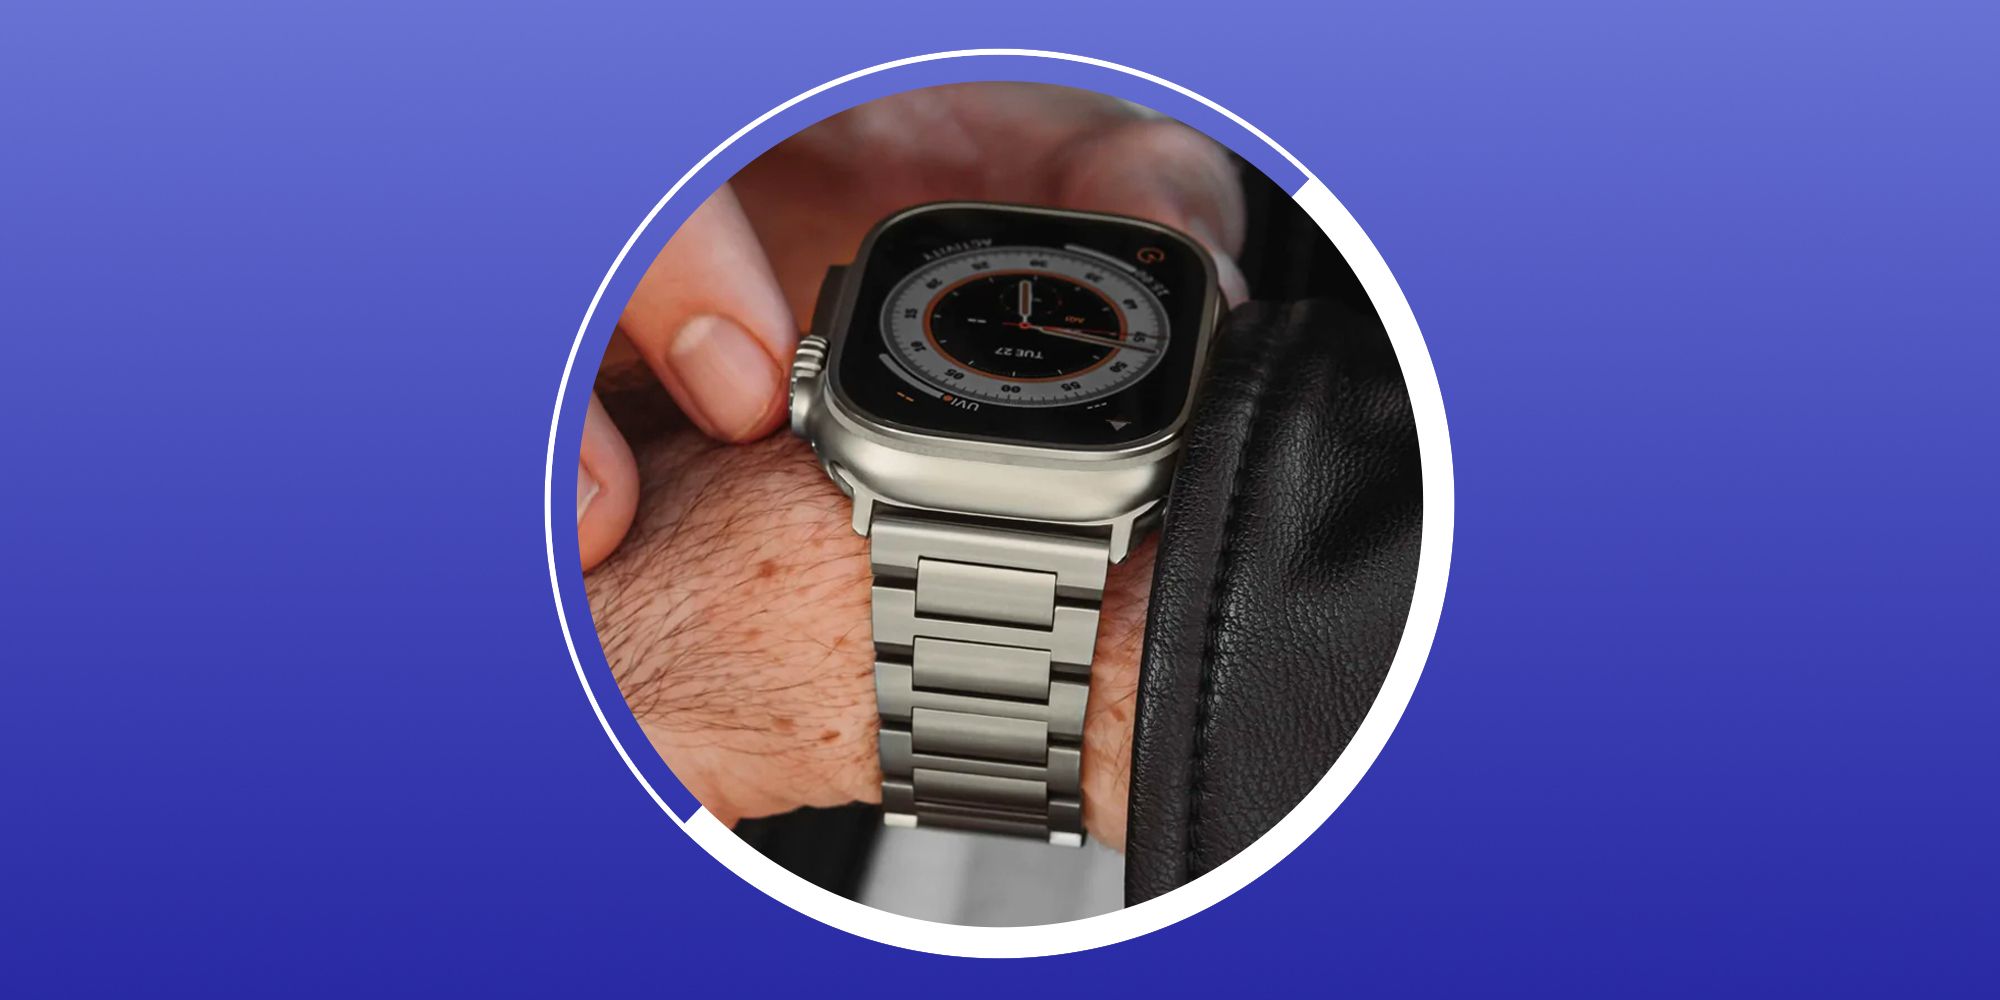 Watch Services – Watch Tech Sales & Repairs